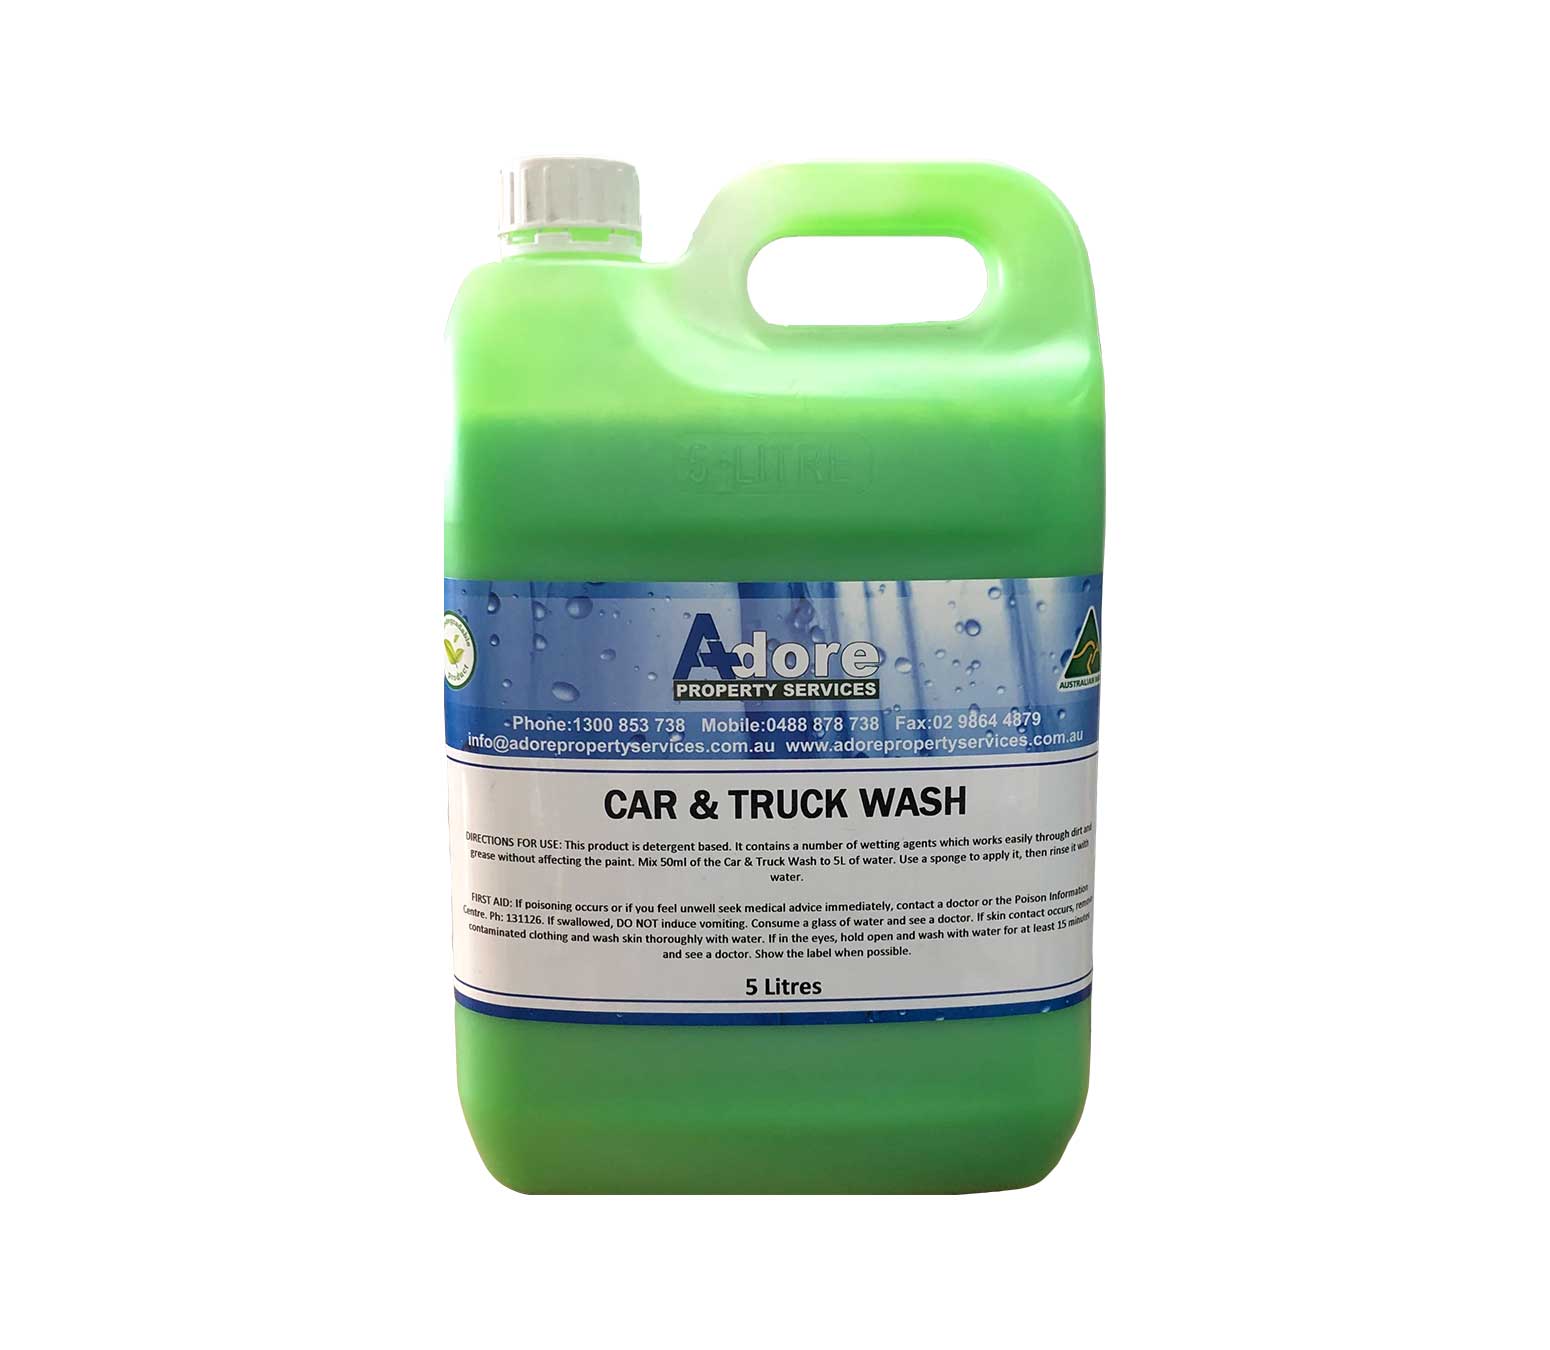 CAR & TRUCK WASH - Concentrated vehicle detergent.